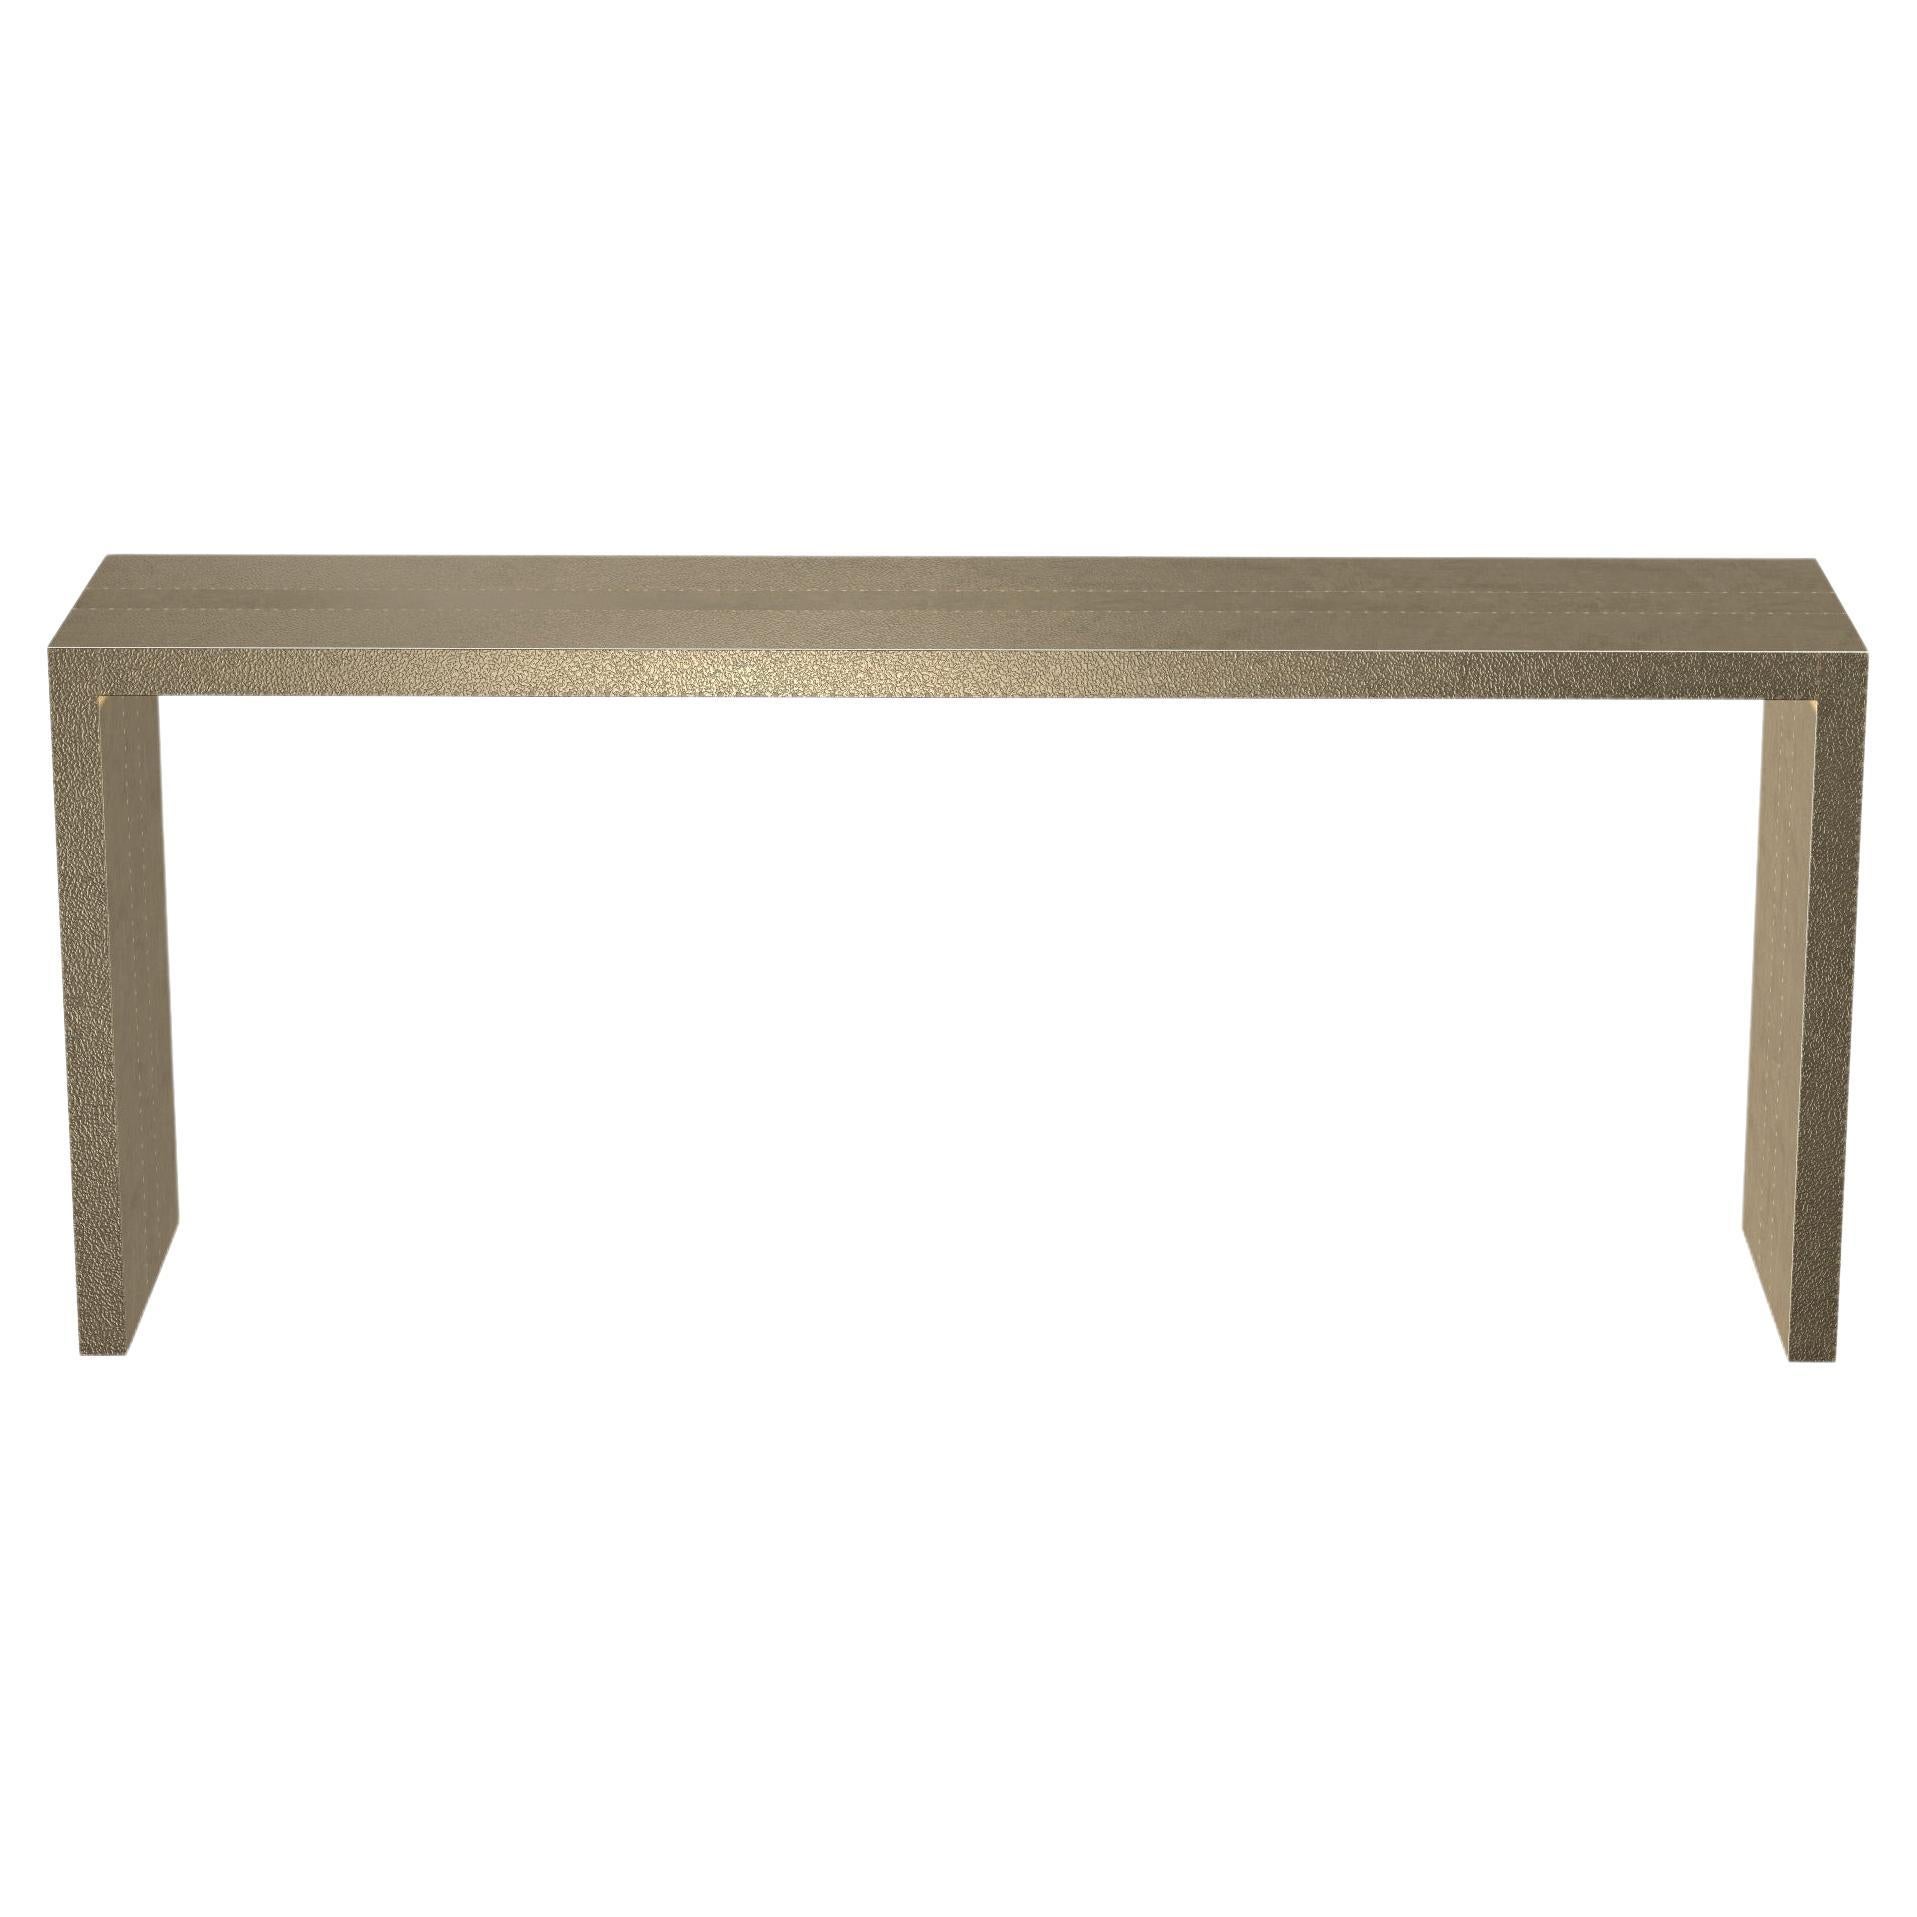 Art Deco Conference Tables Rectangular Console in Fine Hammered Brass by Alison  For Sale